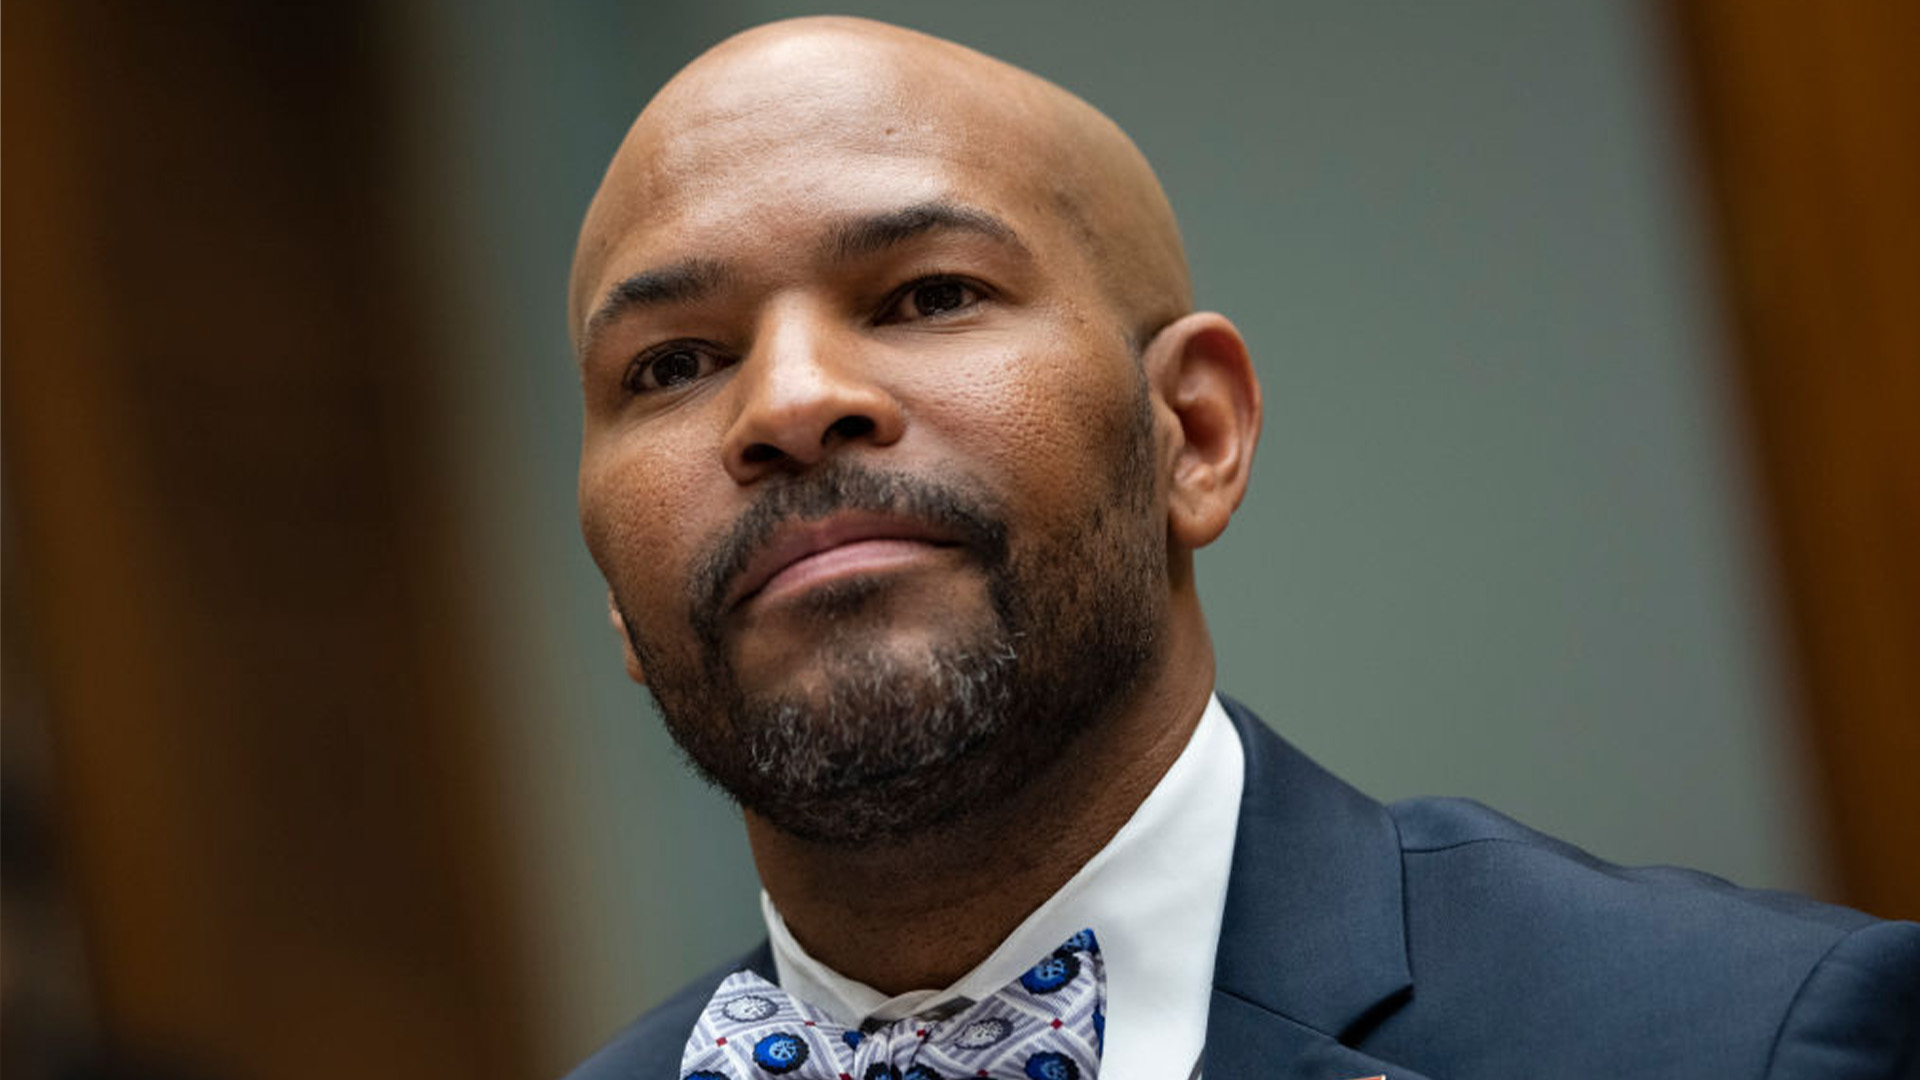 Former US Surgeon General Billed Almost $5K For An ER Visit Due To Dehydration, Calls America ‘Home Of The Medical Bankruptcy’